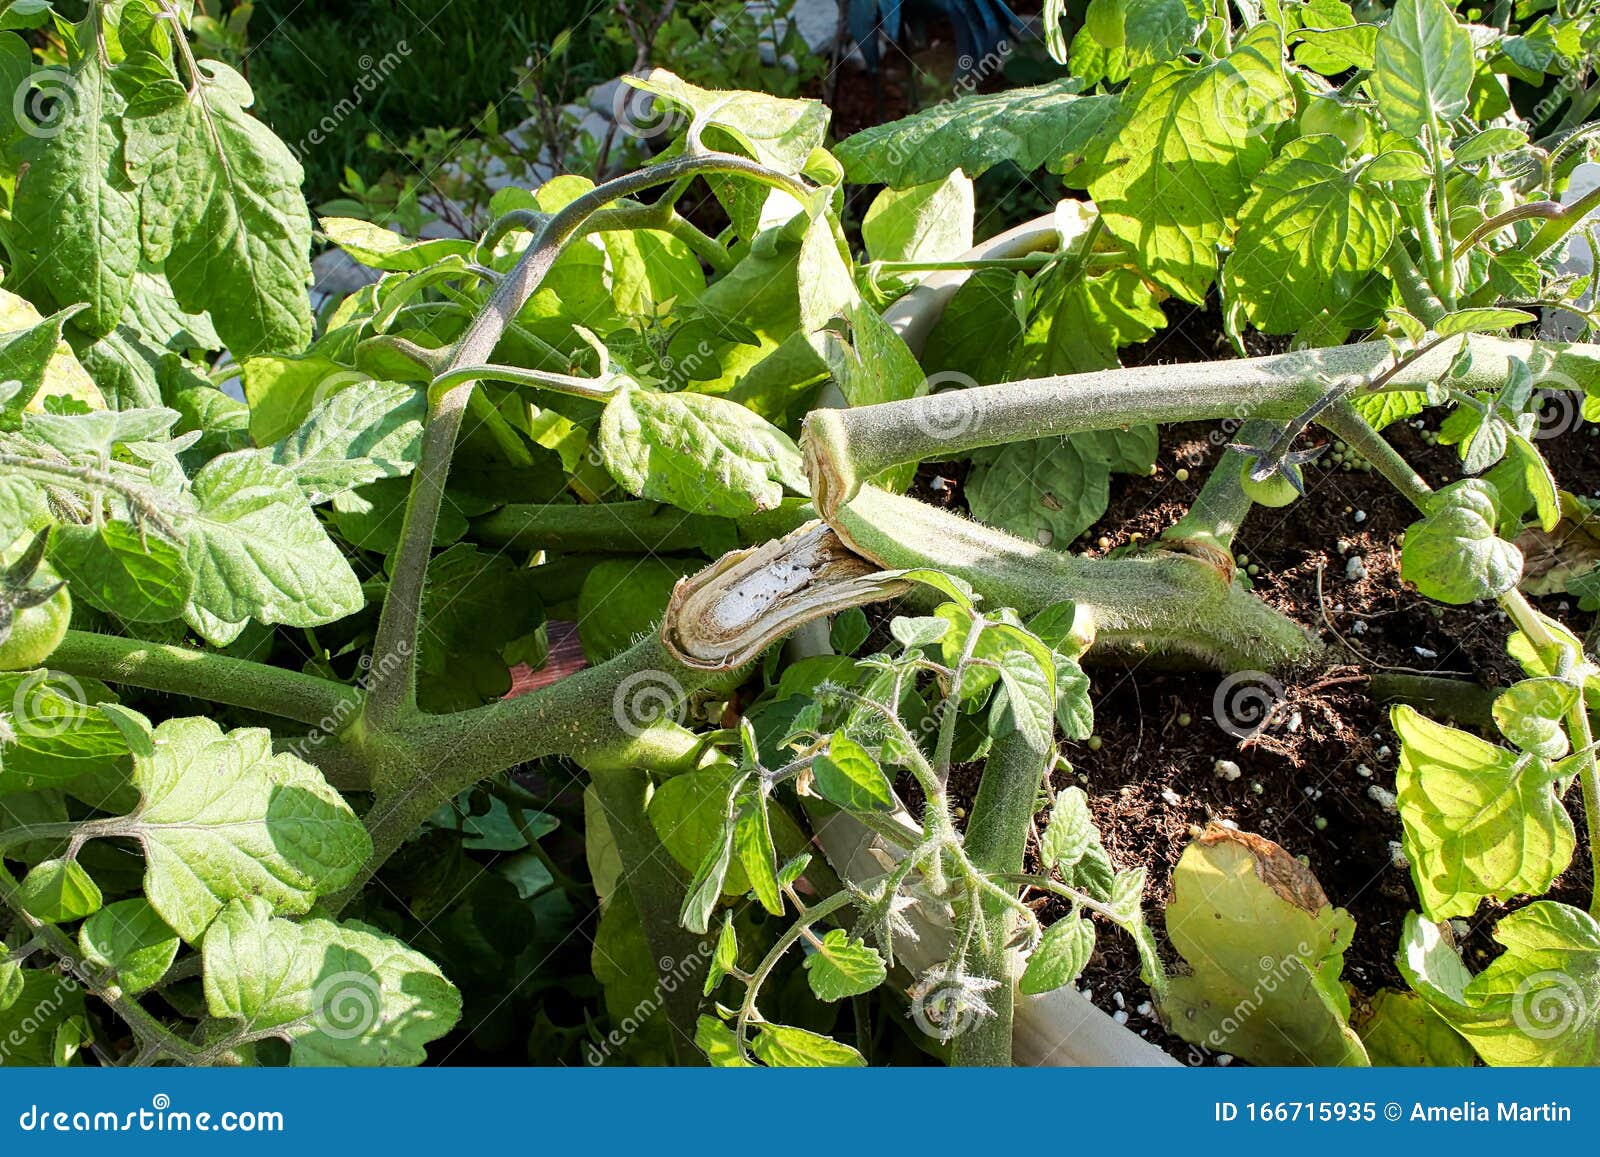 View Of A Tomato Plant Branch That Has Been Broken Stock Image Image Of Green Leaves 166715935